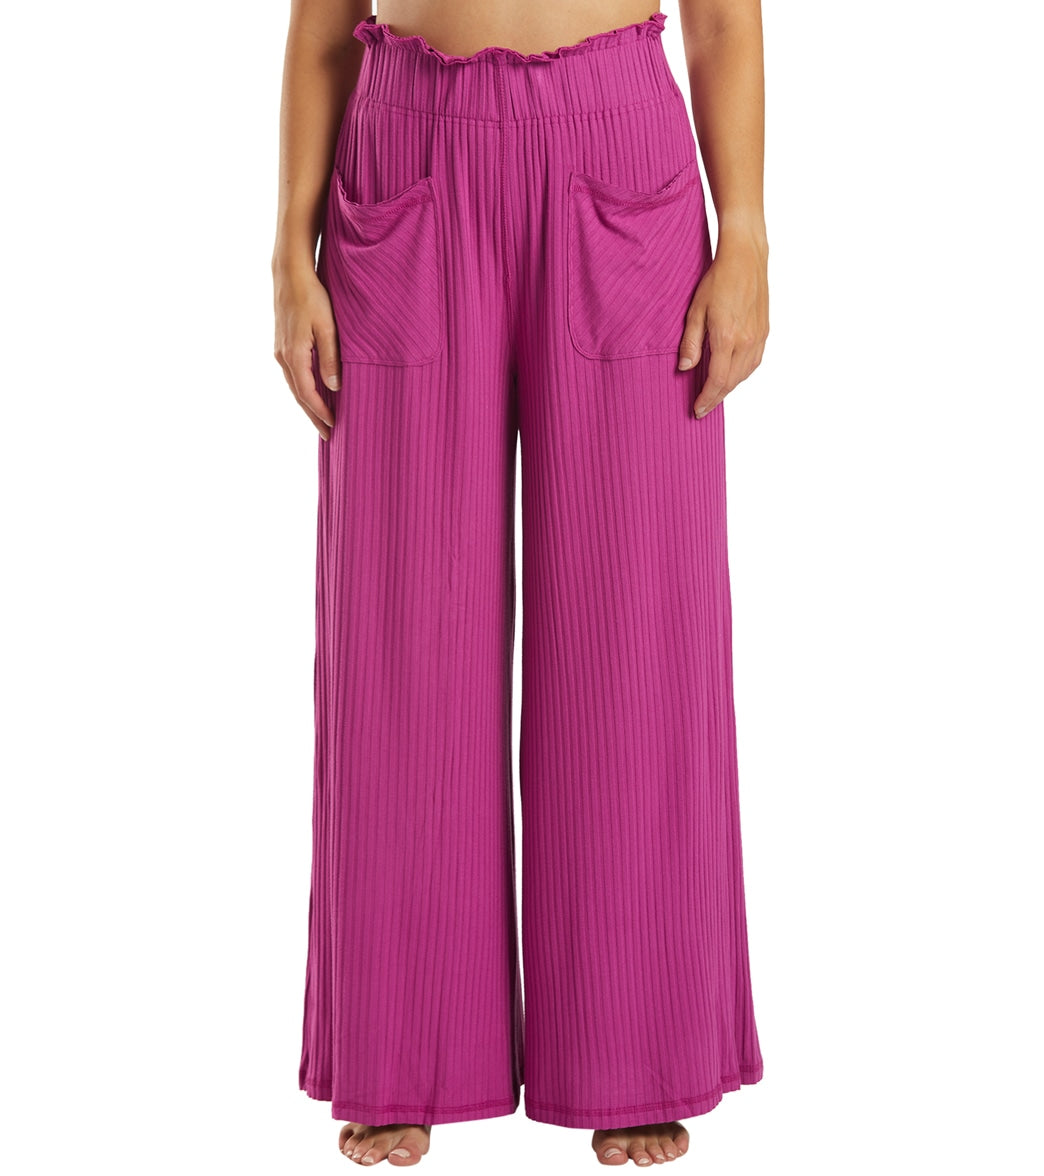 NWT Free People Movement Blissed Out Wide-Leg Pants Size Medium